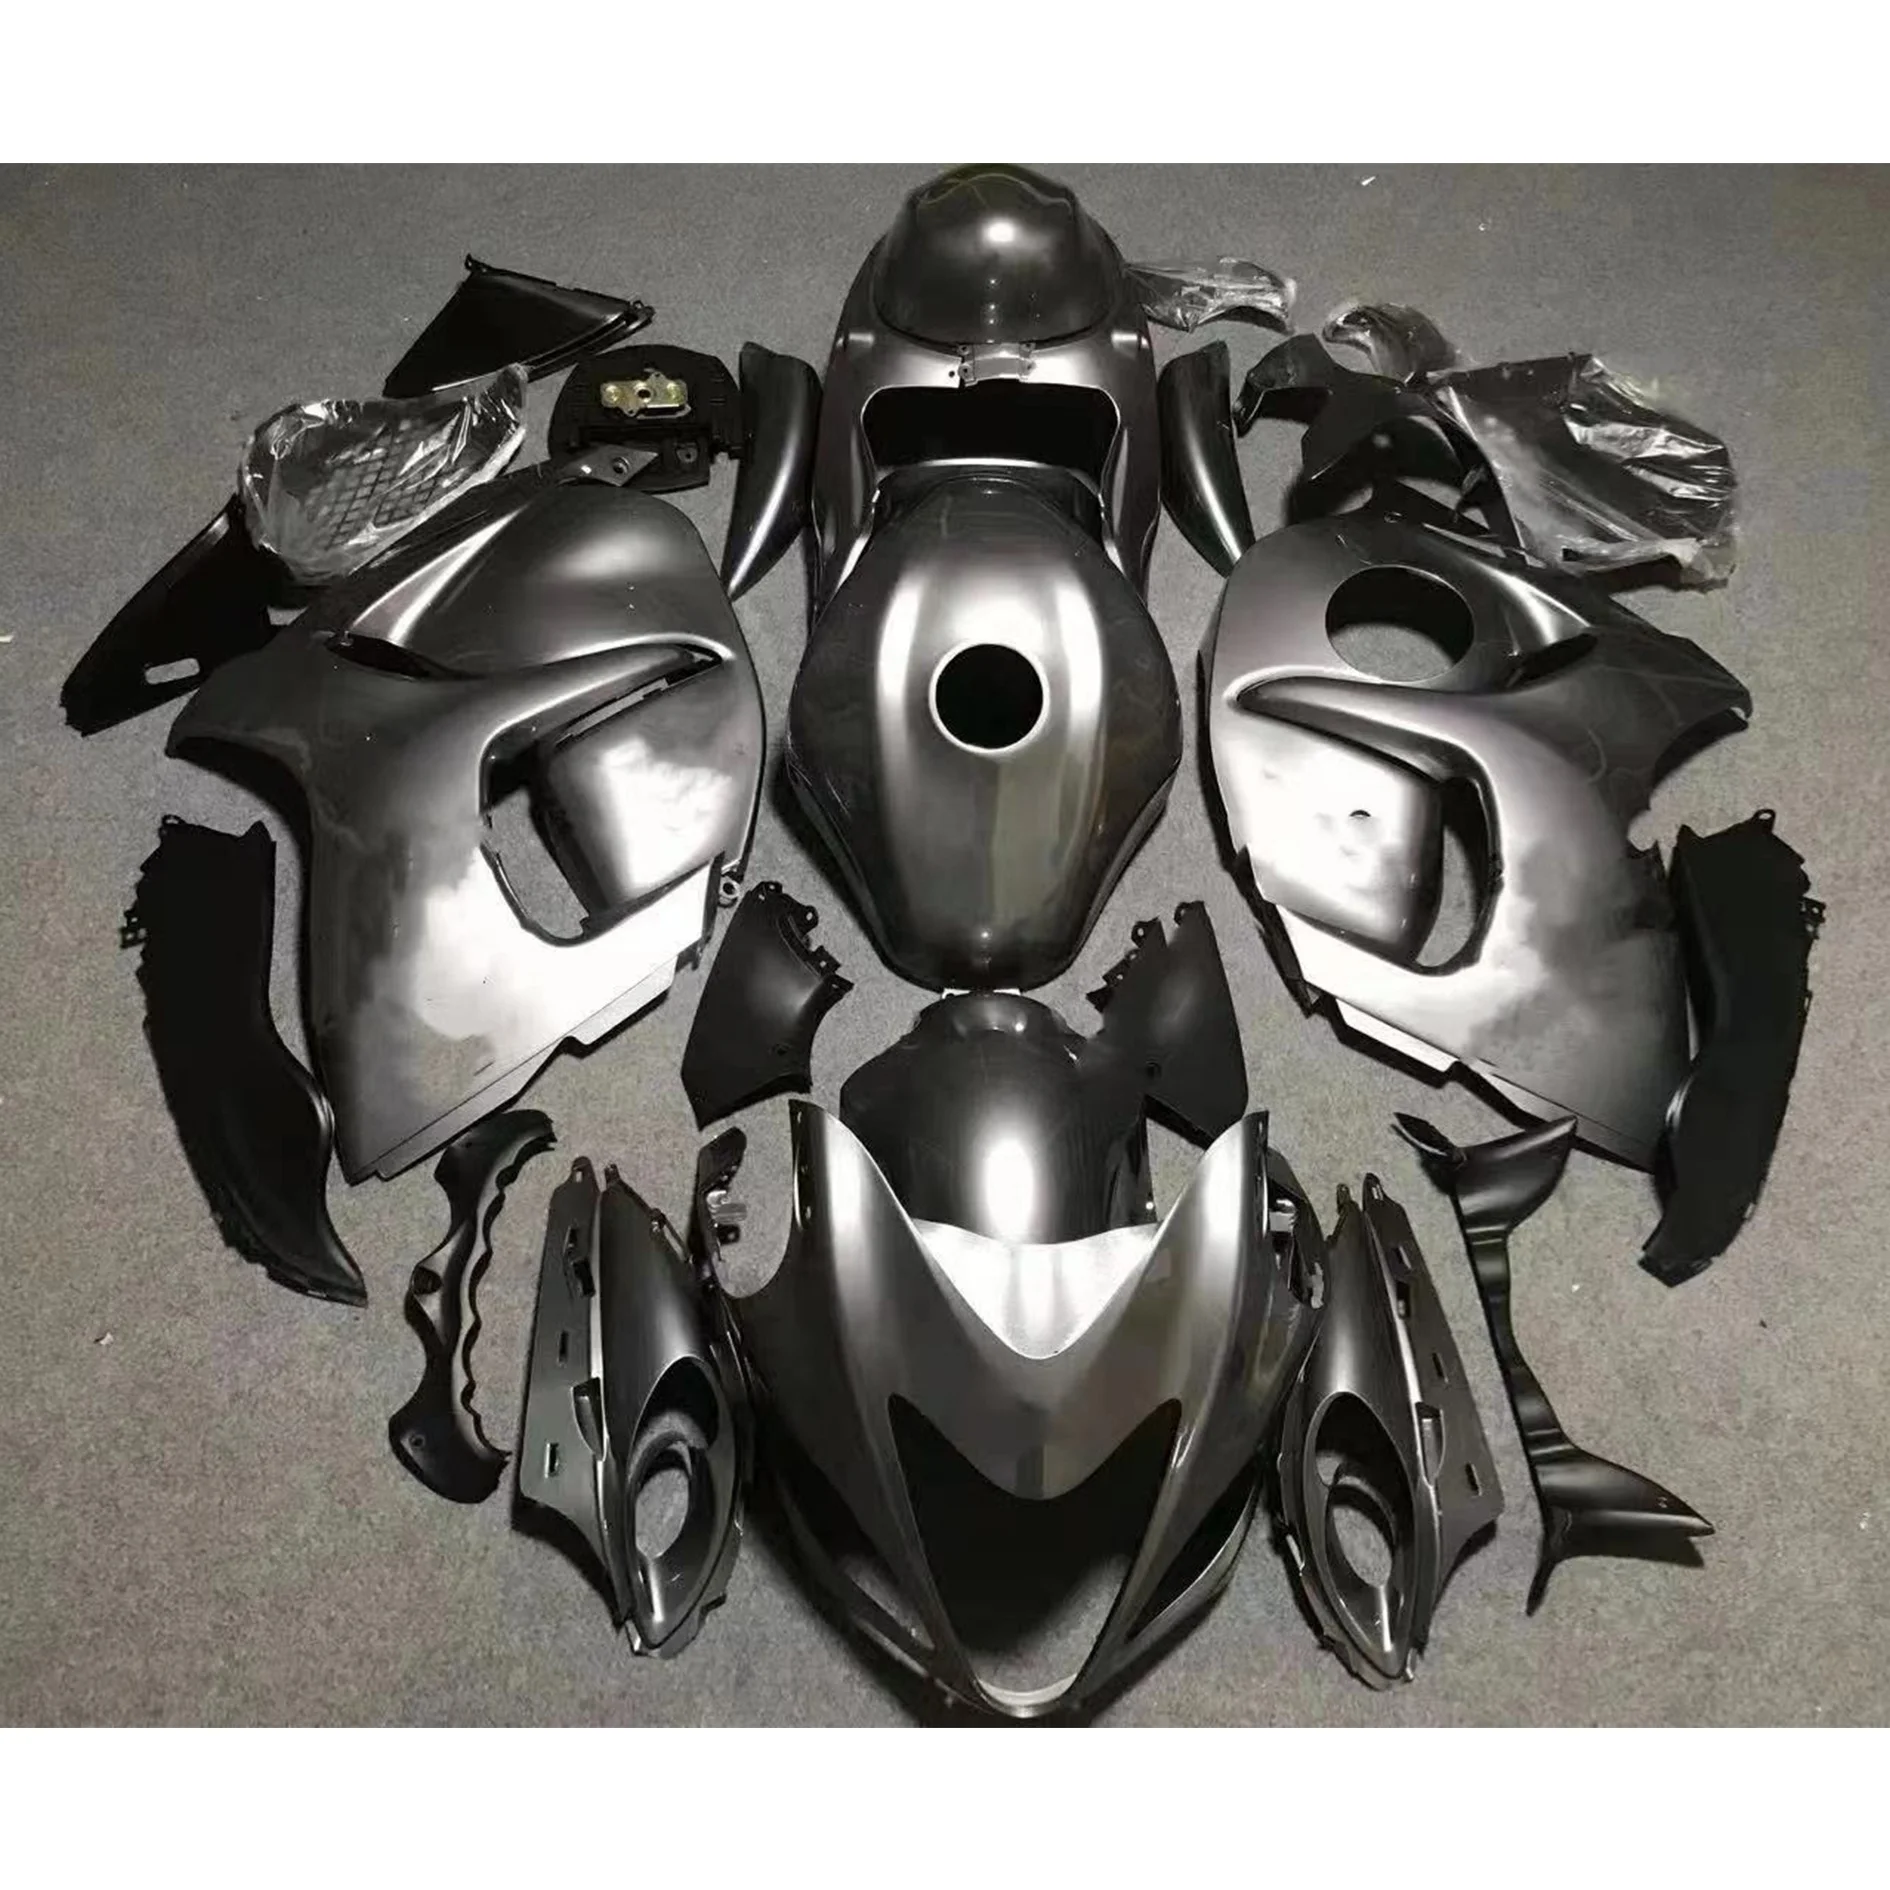 

2022 WHSC Silver Black OEM Motorcycle Accessories For SUZUKI hayabusa GSXR1300 2008-2015 08 Motorcycle Body Systems Fairing Kits, Pictures shown